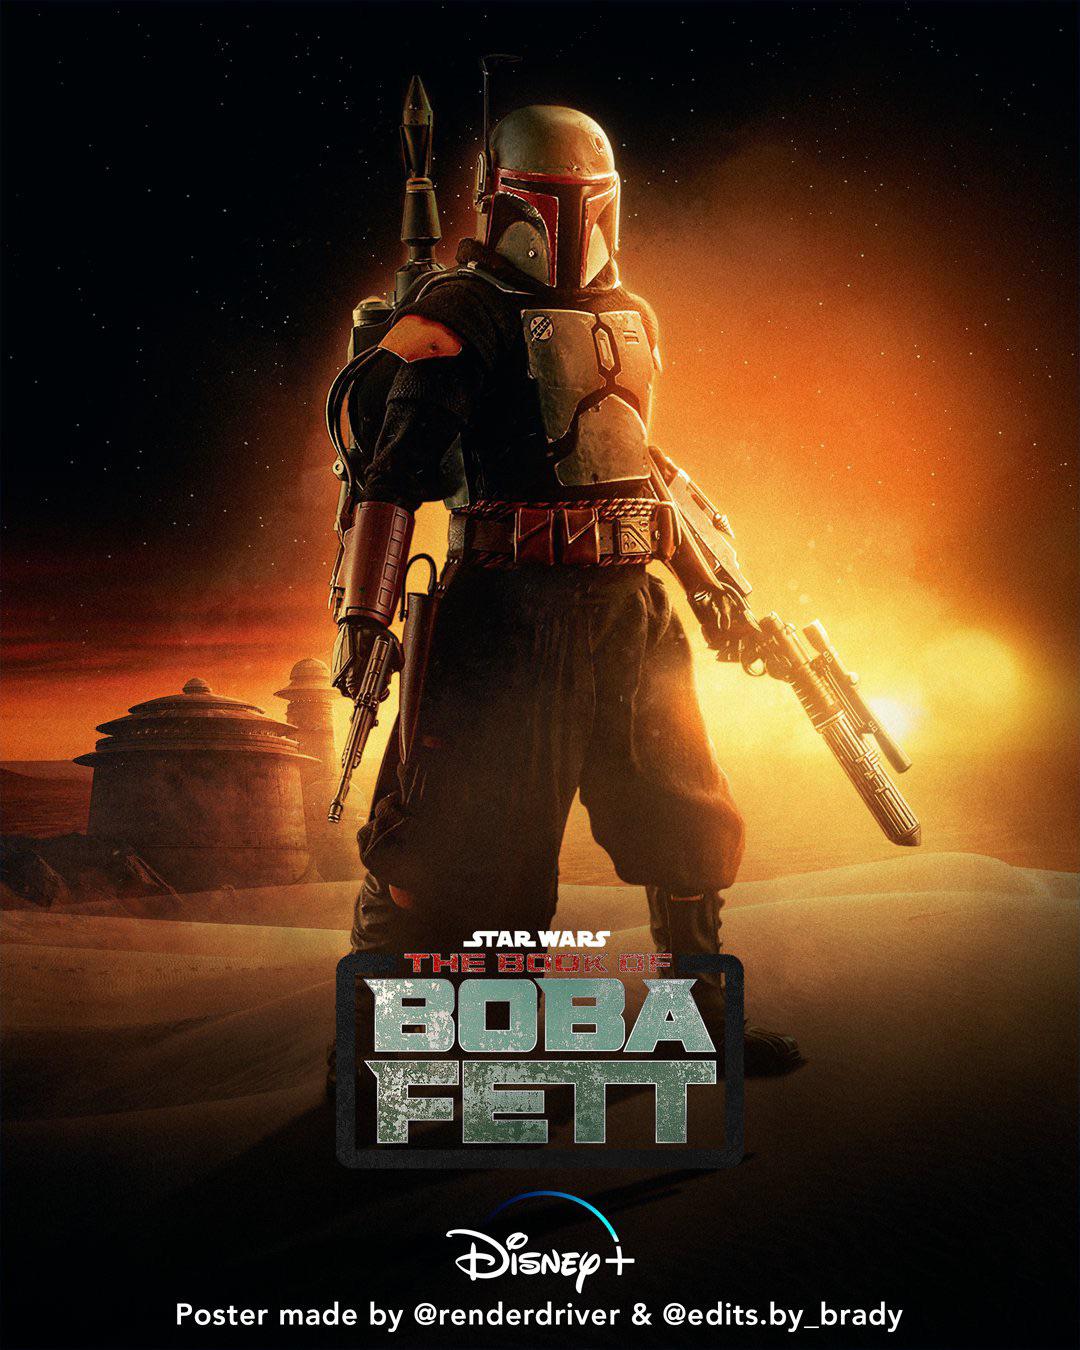 What a great fan poster for the Book of Boba Fett. What do we think the real one will be like?